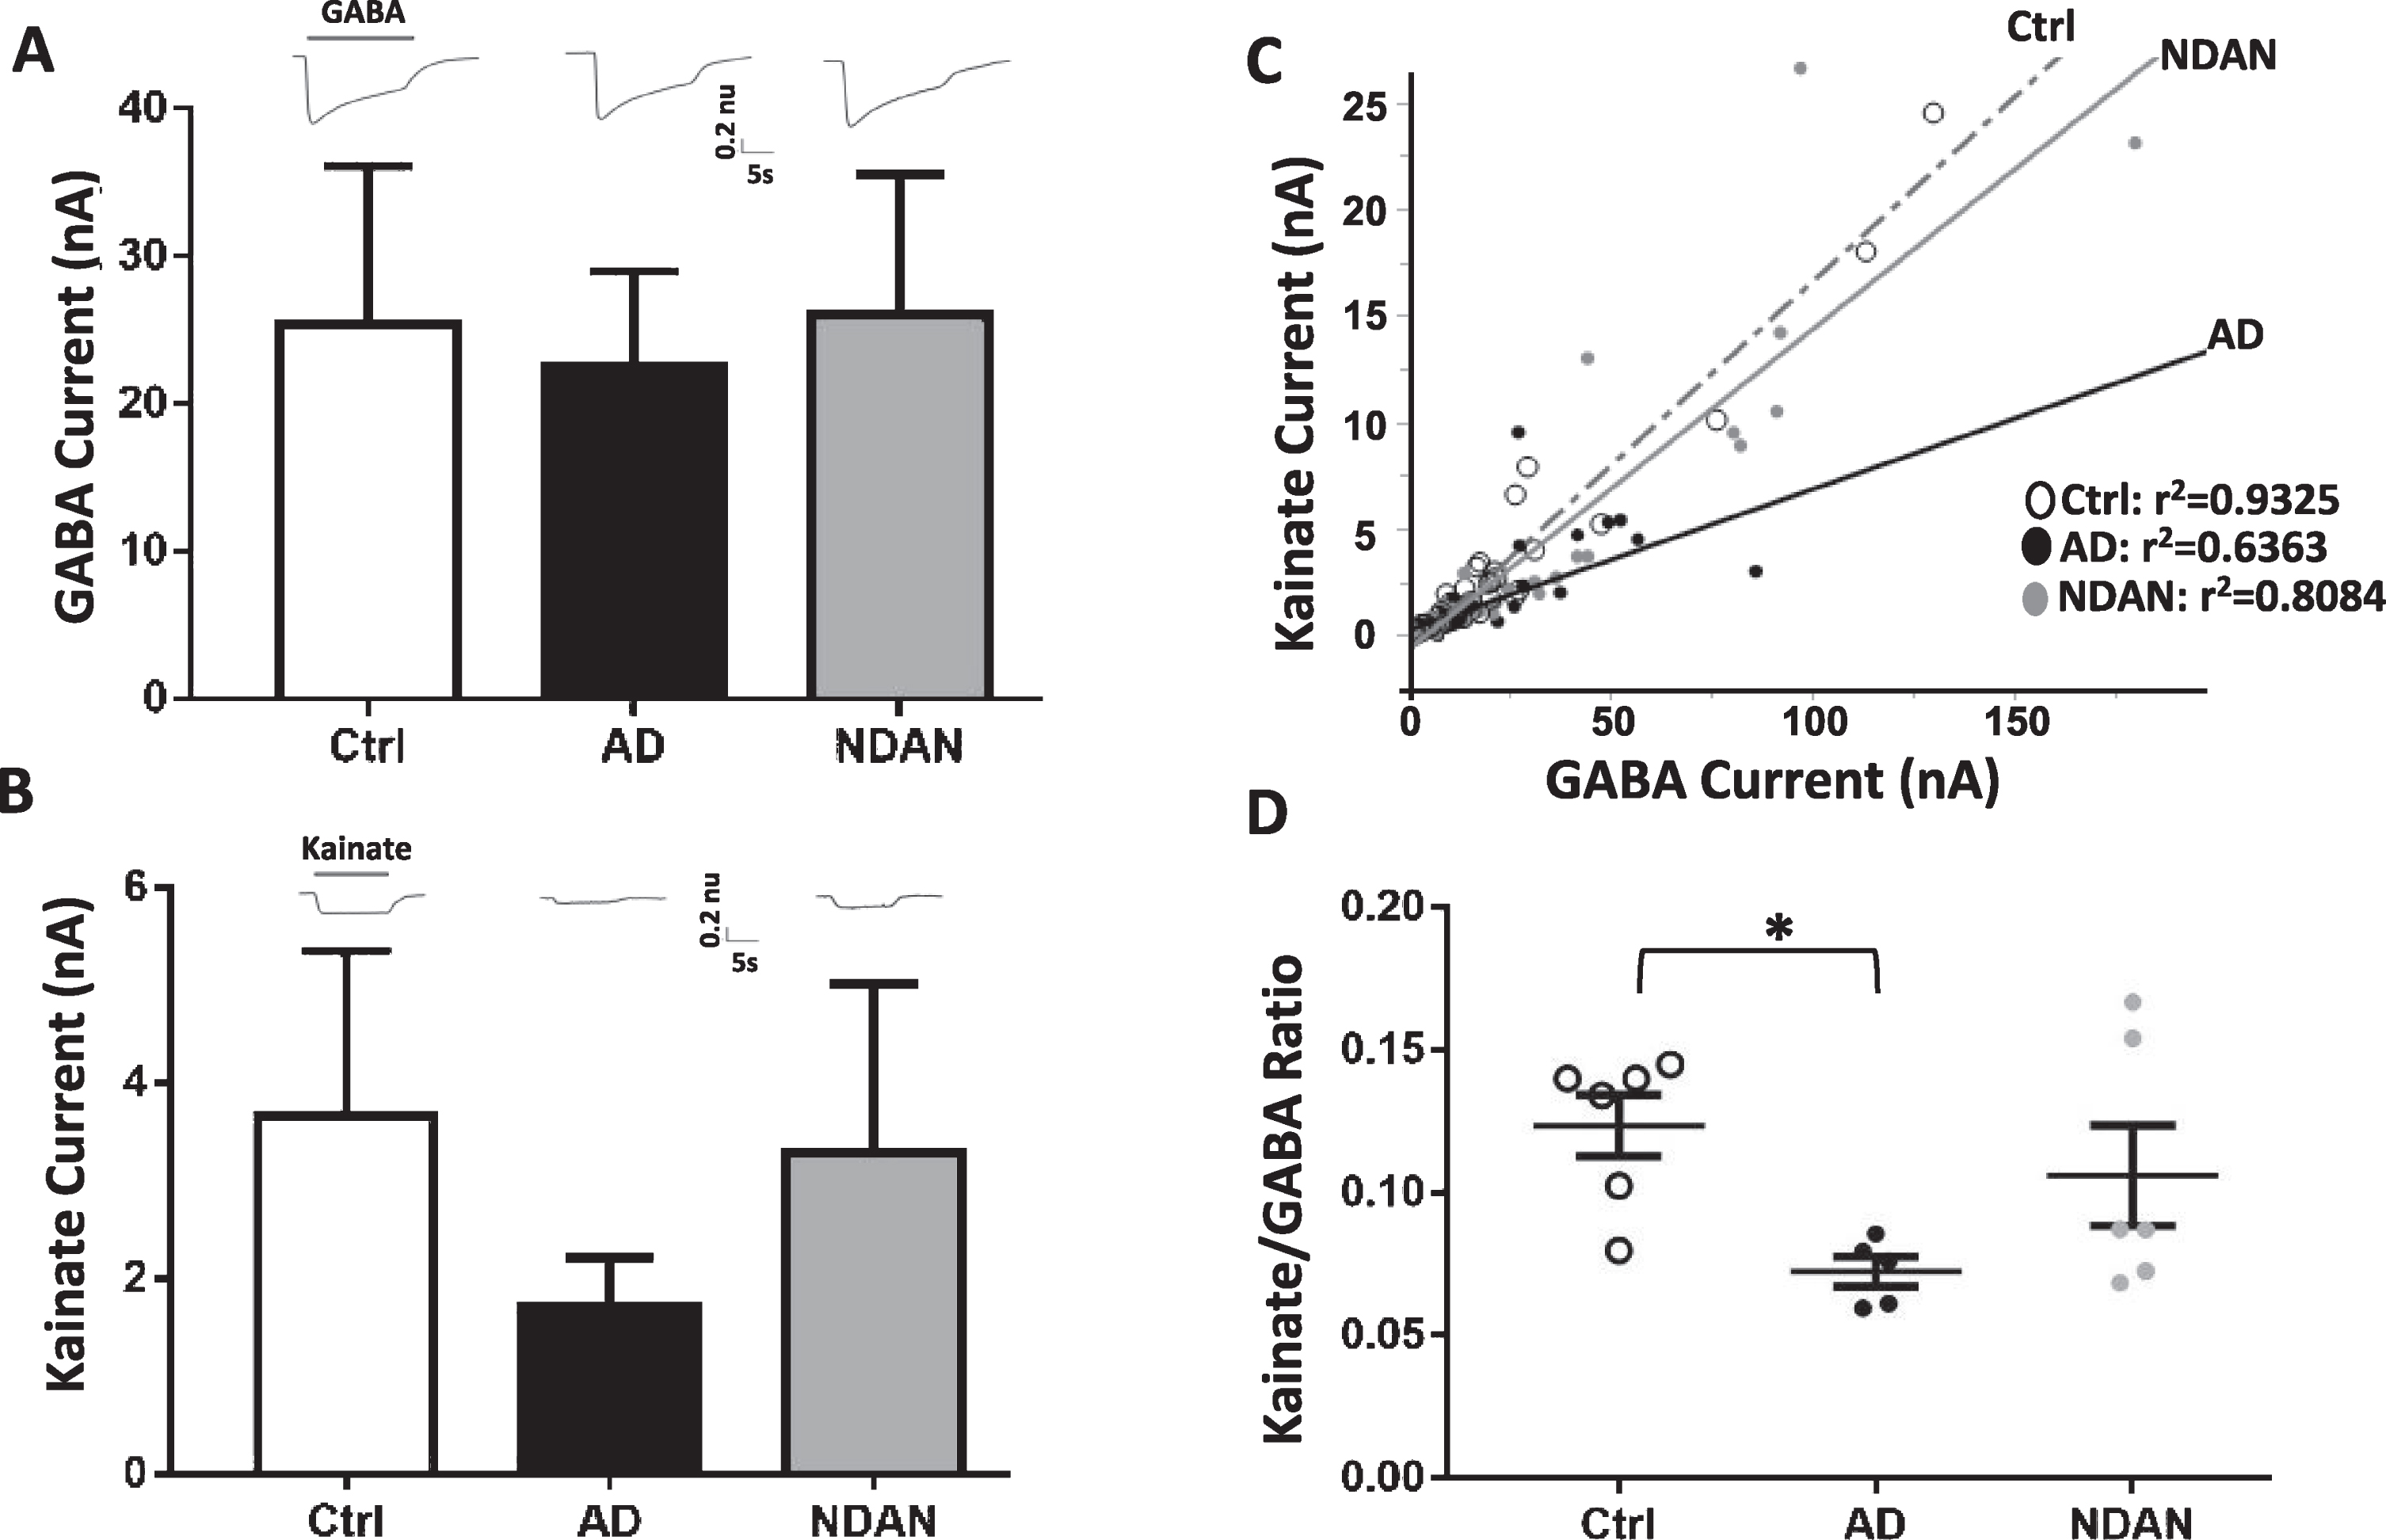 Differential activation of microtransplanted synaptic AMPA and GABA receptors from the frontal cortex of Ctrl, AD and NDAN subjects. A) GABA currents (elicited using 1 mM GABA), representing the inhibitory component, show no significant differences between Ctrl (clear bars), AD (black bar), or NDAN (grey bar). B) Similar to GABA, Kainate currents (elicited using 100 mM Kainate), representing the excitatory component, show no significant difference between the three groups. Representative ion currents for each group is provided above the bars and represented in normalized units (n.u.) to facilitate comparison of the amplitudes of GABA and kainate currents in the same scale. Kainate, instead of glutamate, was used to avoid AMPA receptors desensitization. C) Linear correlation between maximal kainate and GABA responses measured in single oocytes across groups. Each dot in this figure represents a single recorded oocyte. (r2 are shown next to each group; *p < 0.0001). D) Average of the Kainate/GABA ratio in each subject shows reduced values in AD compared to control but not to NDAN. The current ratio was different across groups (with significant reduction between Ctrl and AD (*p = 0.0388), but not between Ctrl and NDAN (p > 0.99) or AD and NDAN (p = 0.2268). Each dot represents a single subject. Color schematic for each group are provided in the legends for (C) and (D).